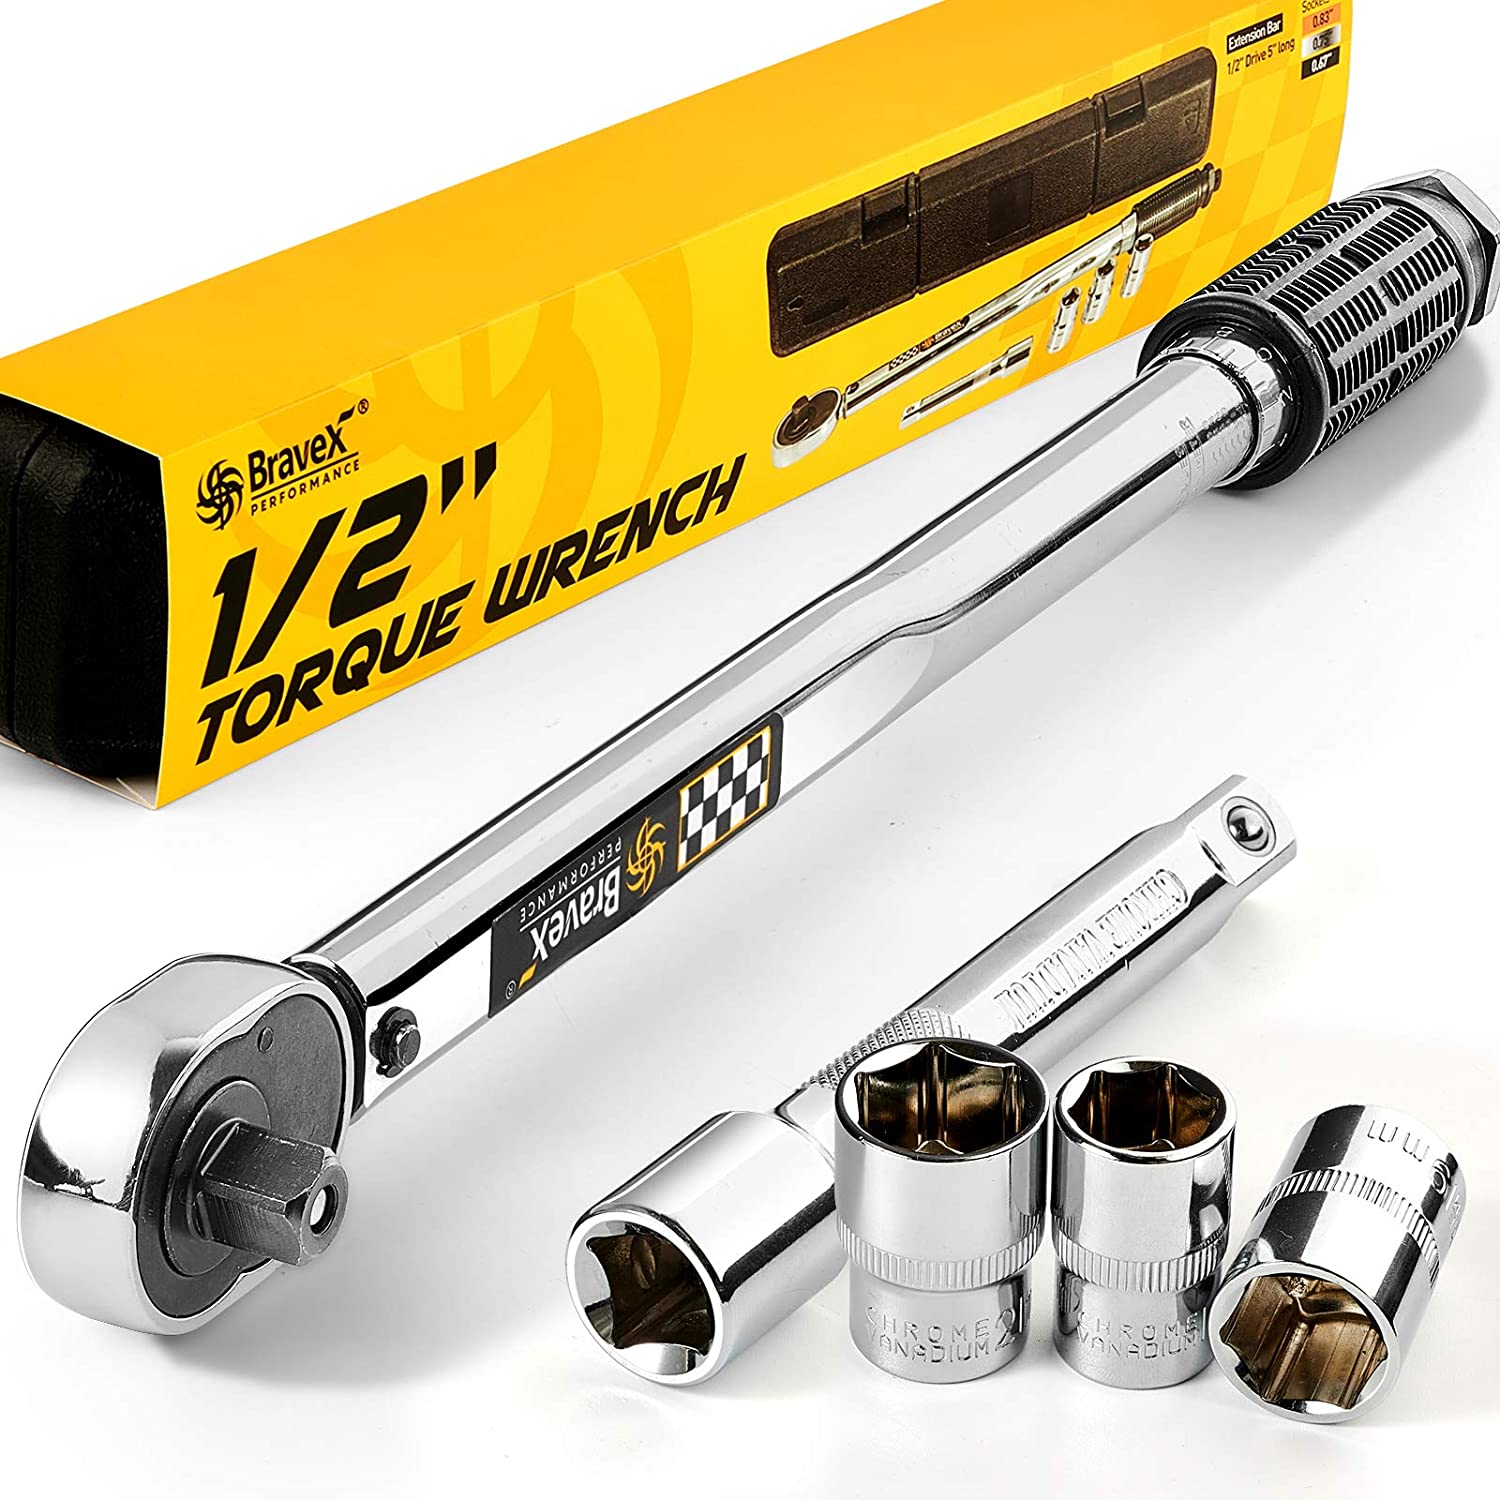 1/2" torque wrench